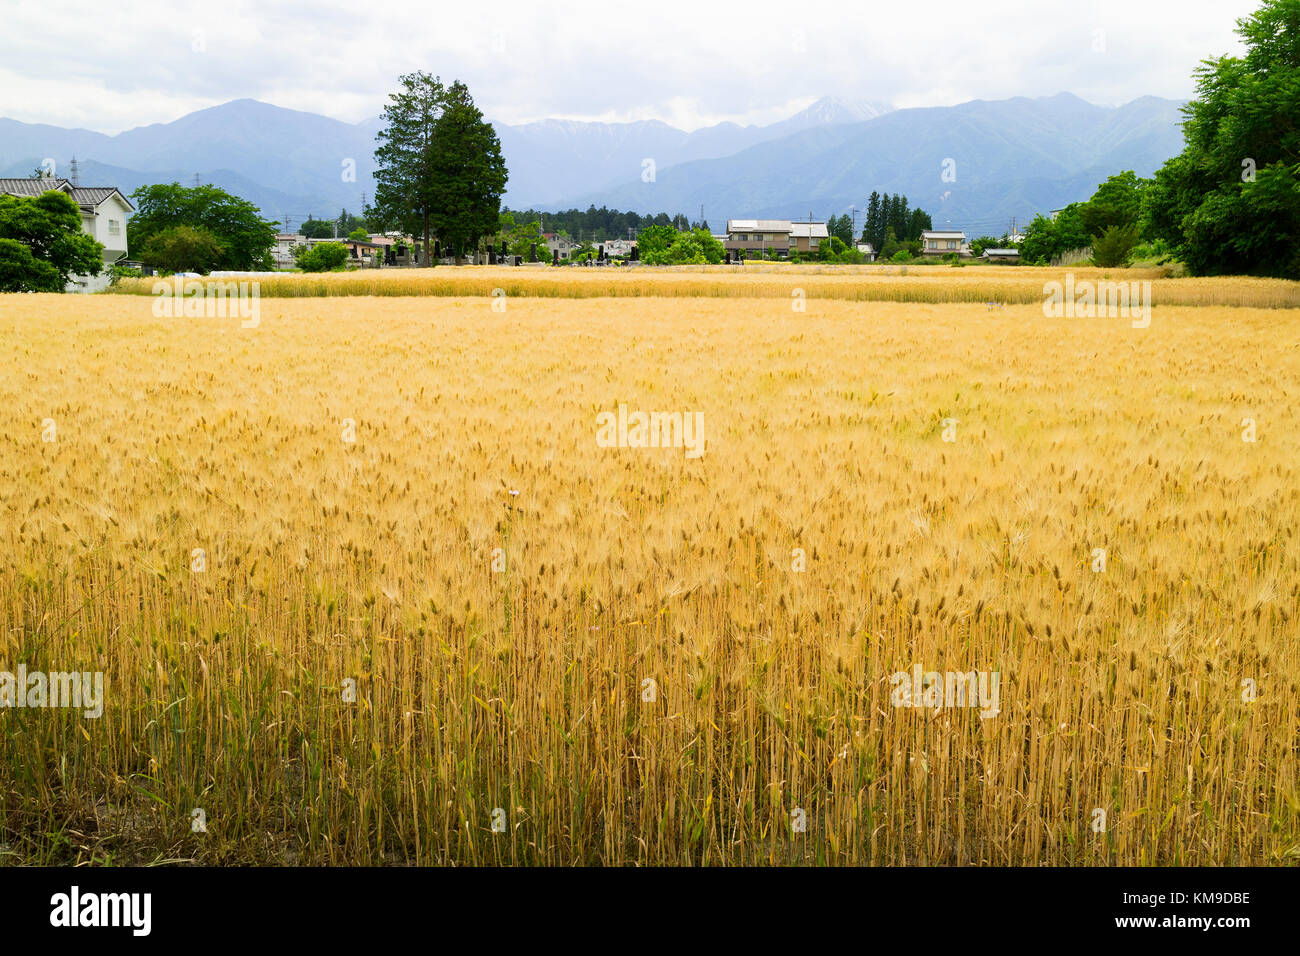 Hokata - Japan, June 6, 2017: Rice field with yellow plants in spring and mountains in the background in Hotaka, Japan Stock Photo